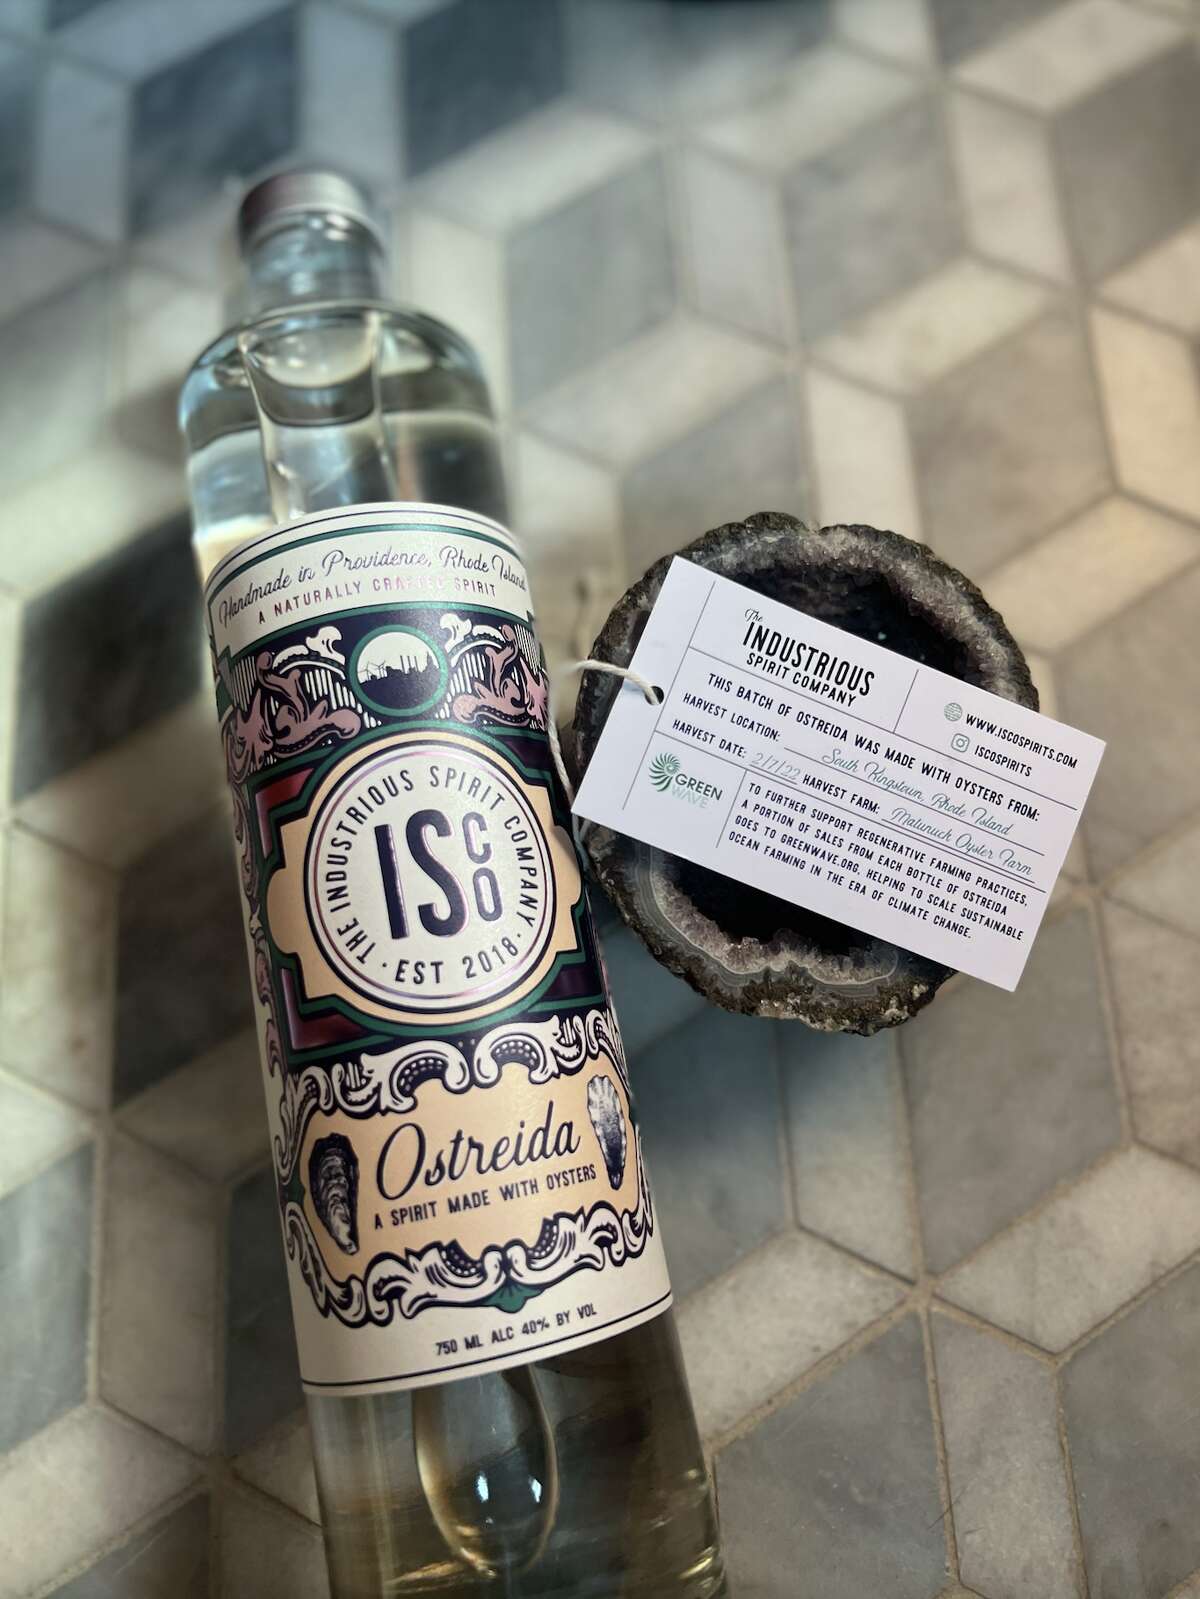 Ostreida vodka from Industrious Spirit Co., distilled with oysters. 